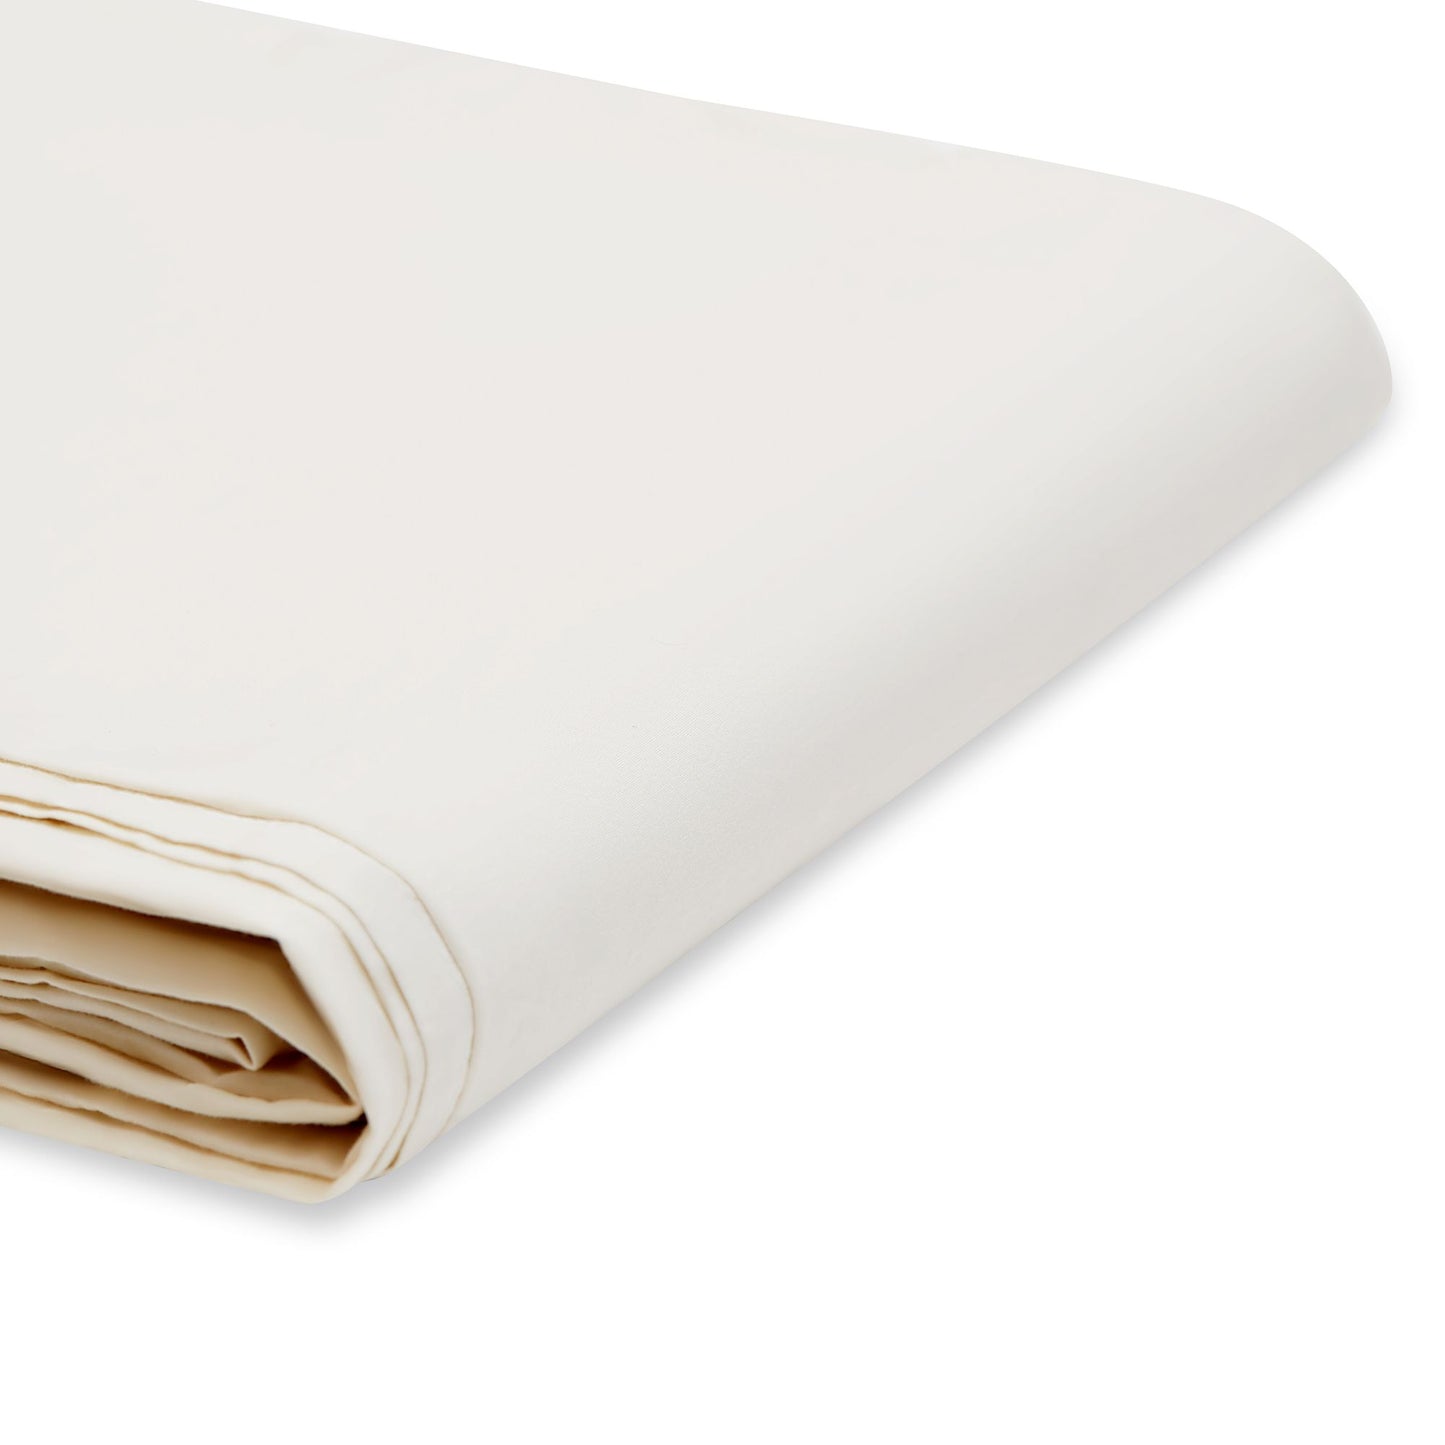 Antique White Relaxed Percale Sheet Set